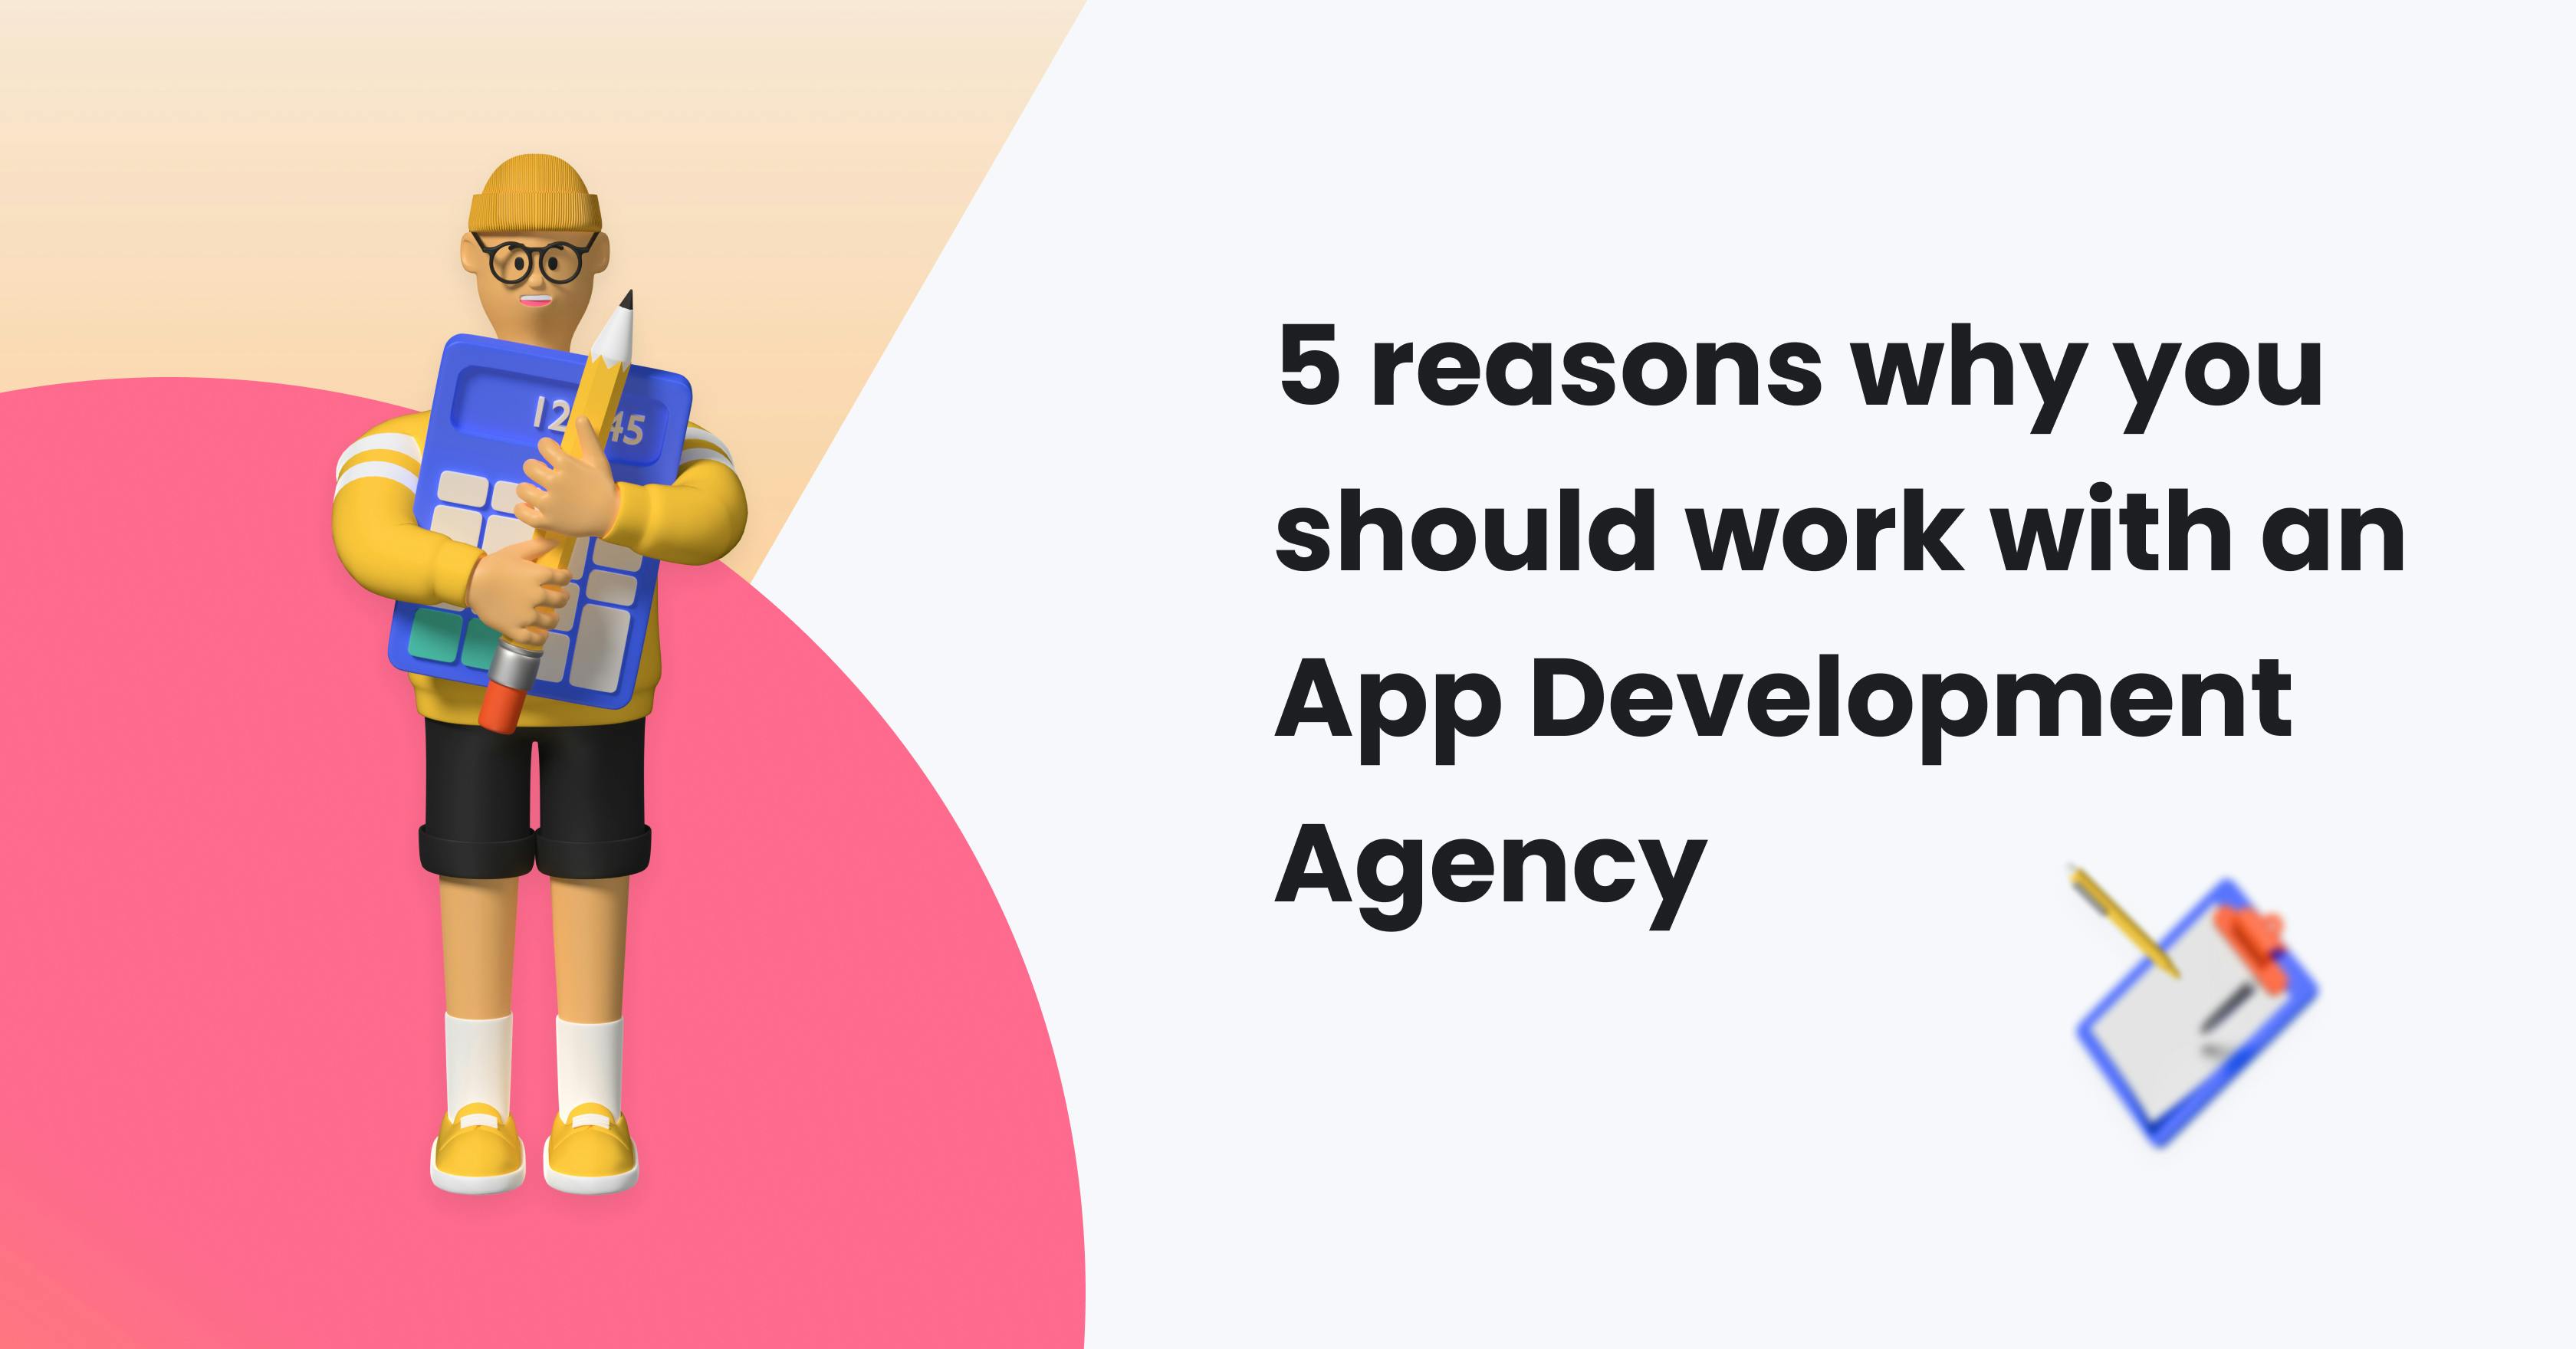 Nightborn - 5 reasons why you should work with an App Development Agency